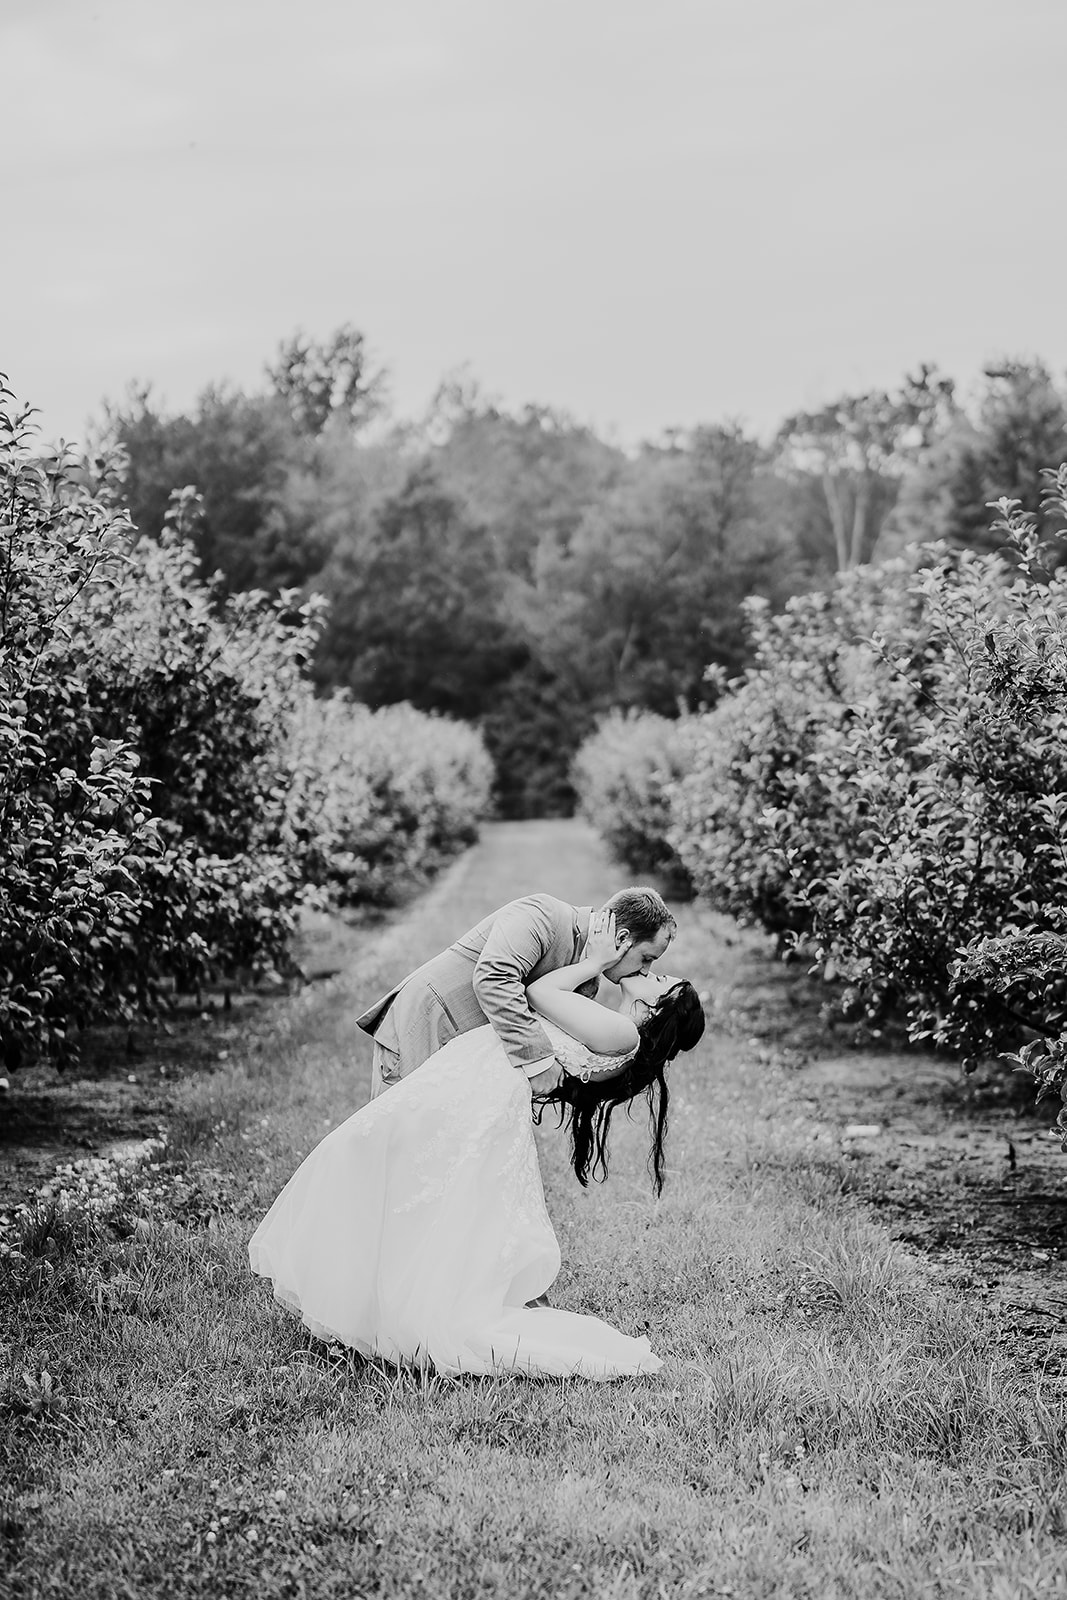 A happy groom kisses his bride between rows of trees in a Wisconsin apple orchard. Black and white bridals Bride and groom pose Chippewa Valley wedding #dixonappleorchard #orchardweddingvenue #outdoorwedding #appleorchardwedding #wisconsinweddingvenue